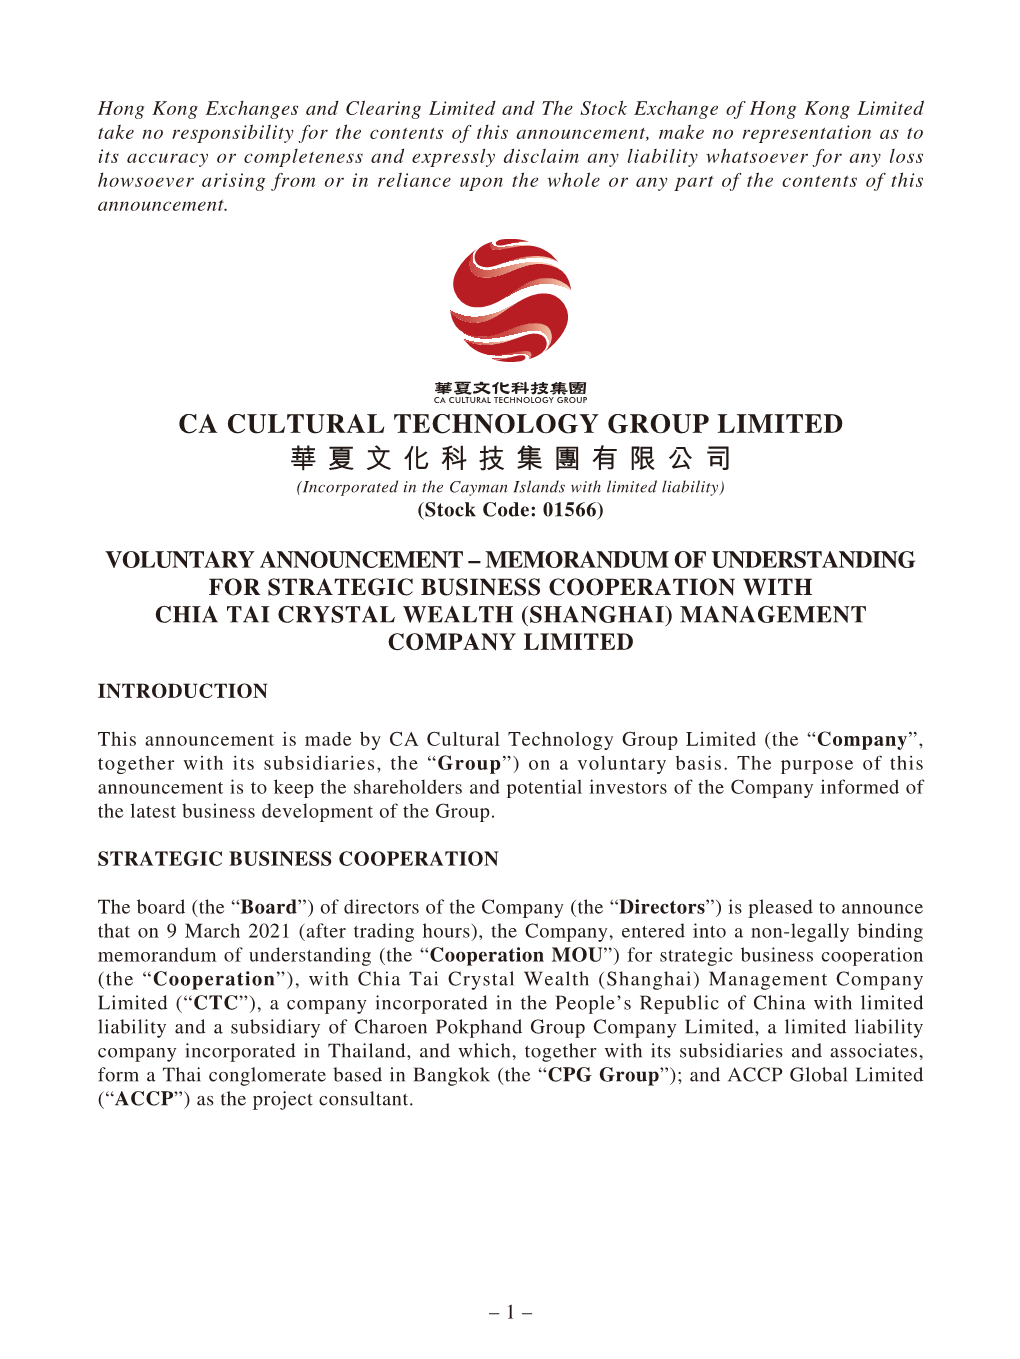 CA CULTURAL TECHNOLOGY GROUP LIMITED 華夏文化科技集團有限公司 (Incorporated in the Cayman Islands with Limited Liability) (Stock Code: 01566)